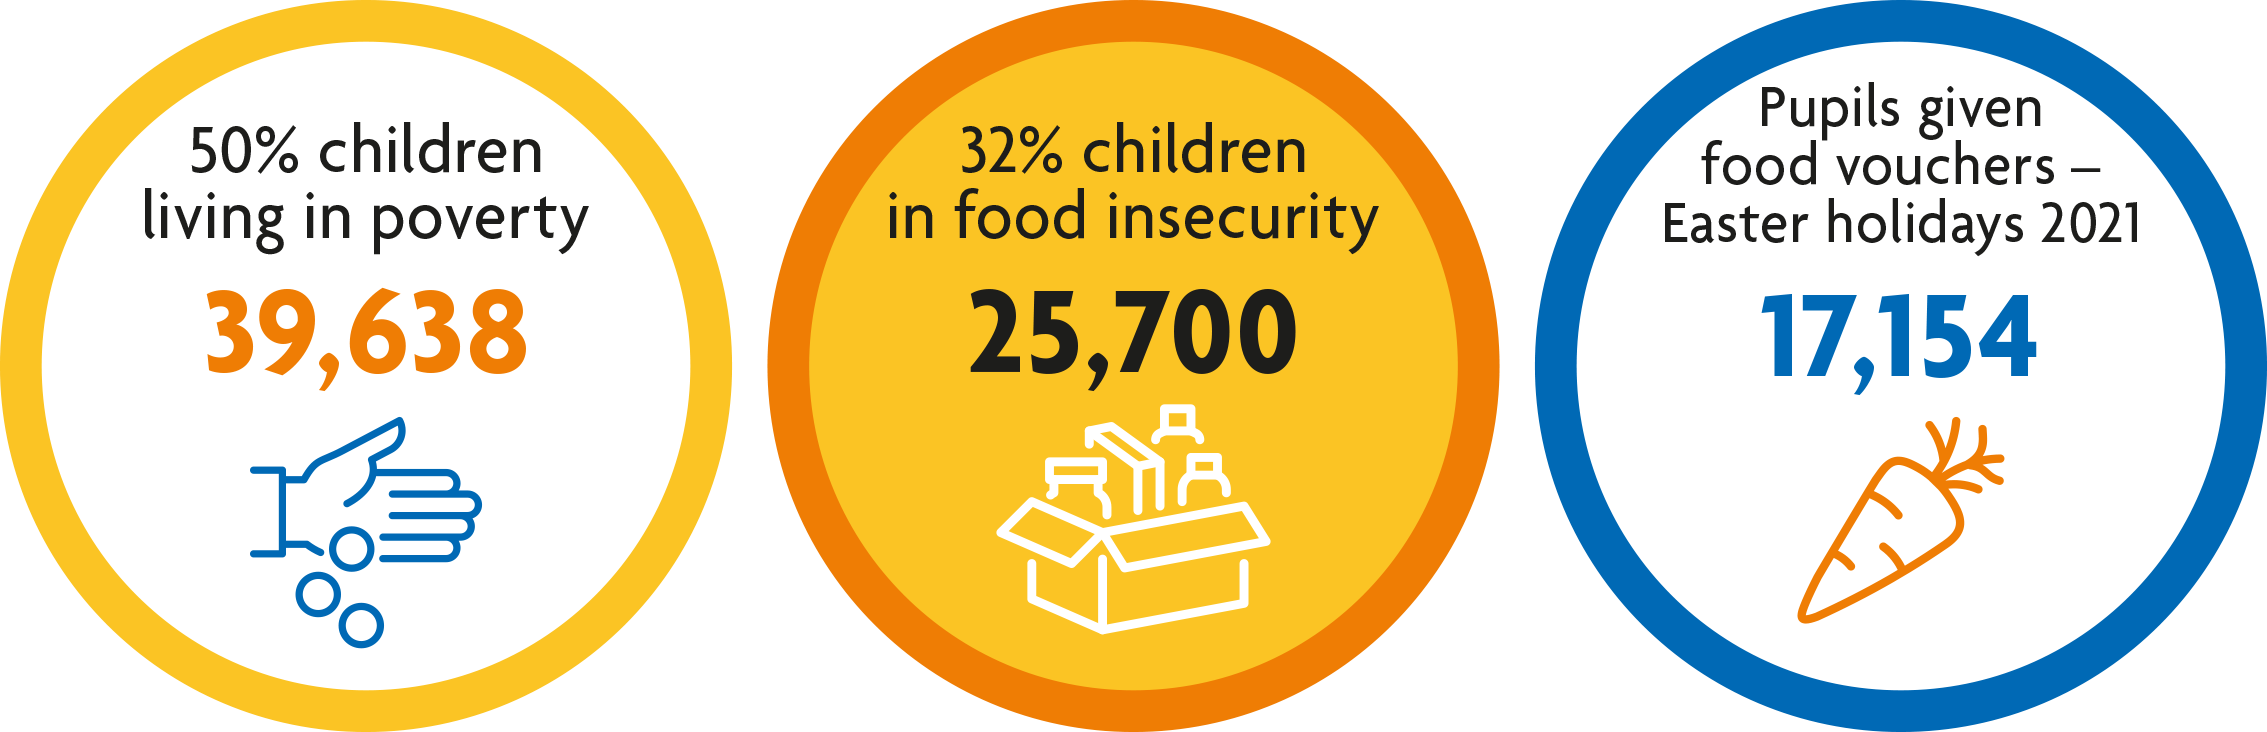 Facts about food insecurity